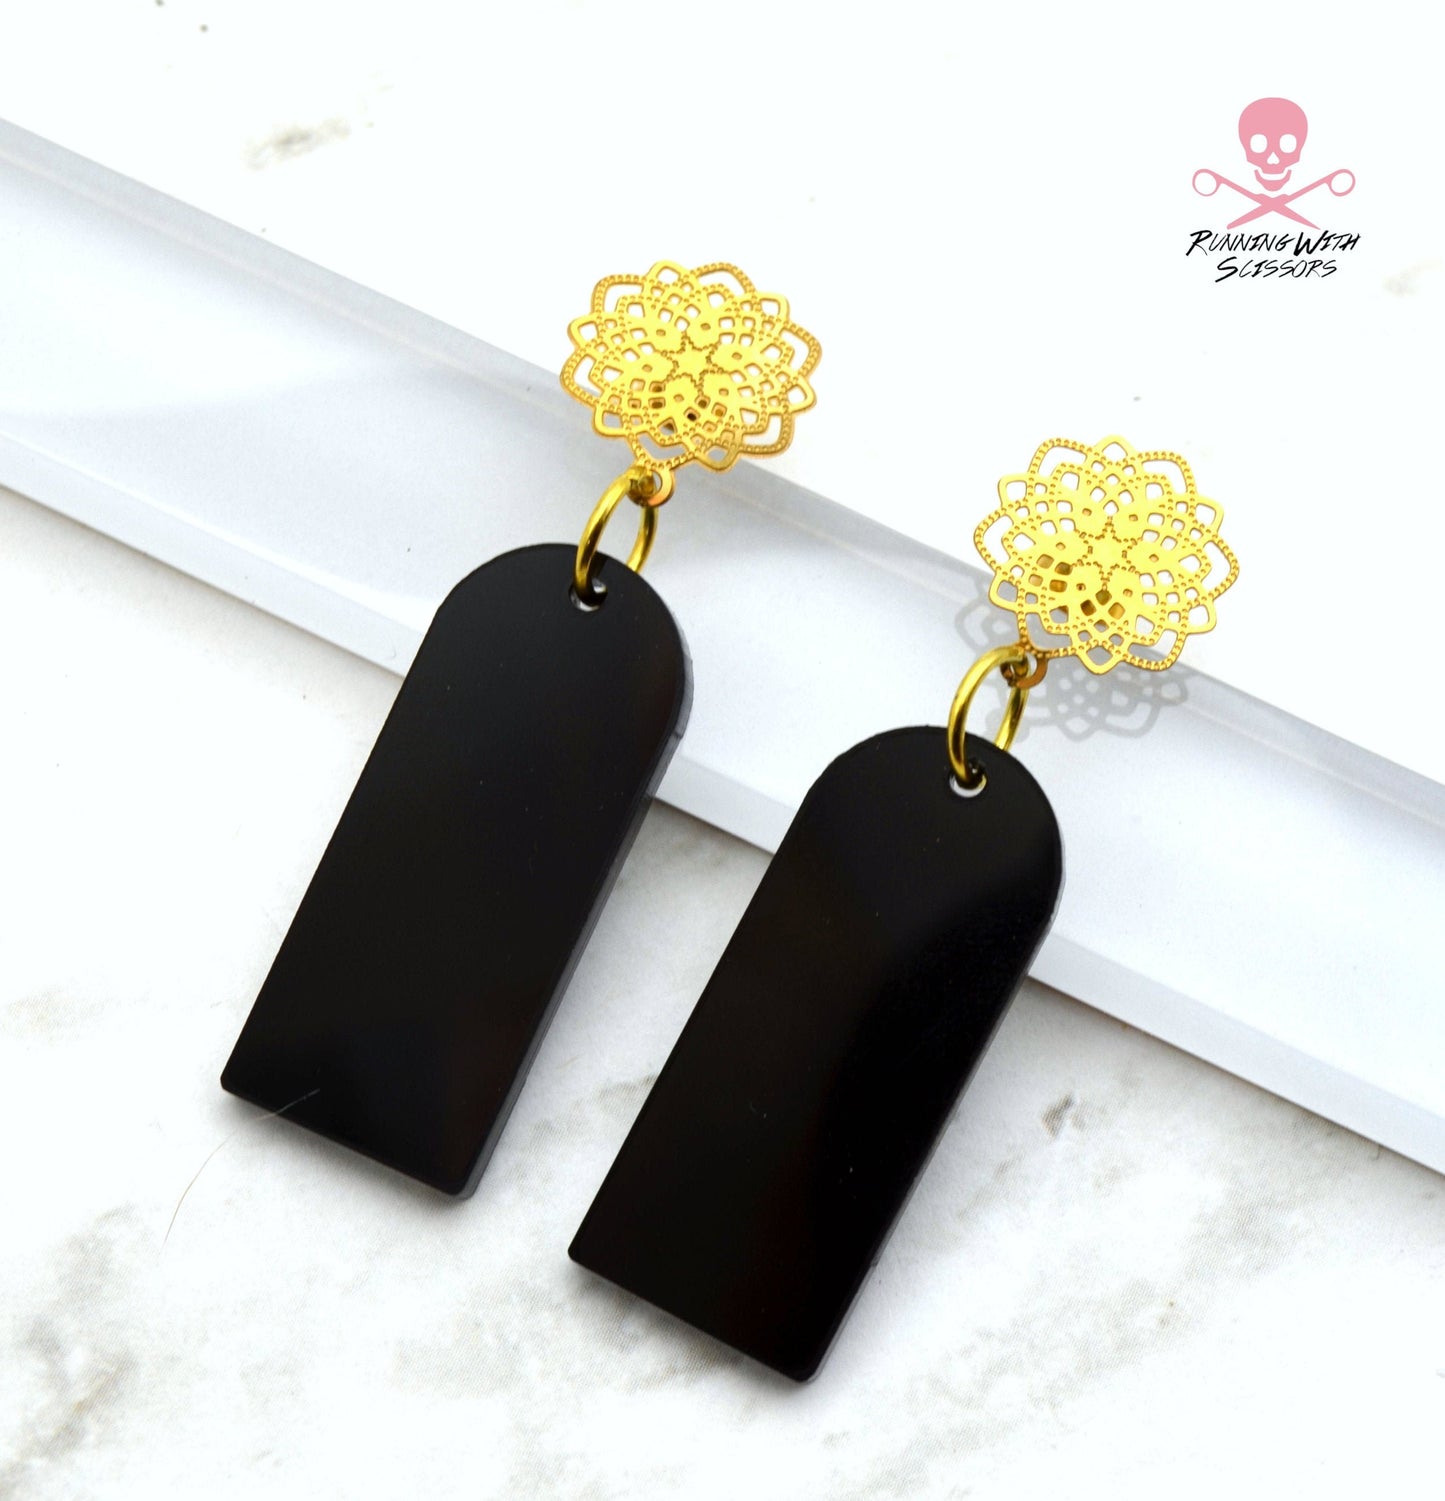 SALE Trendsetter Dangles - Black and Gold Post Top Laser Cut Acrylic Earrings